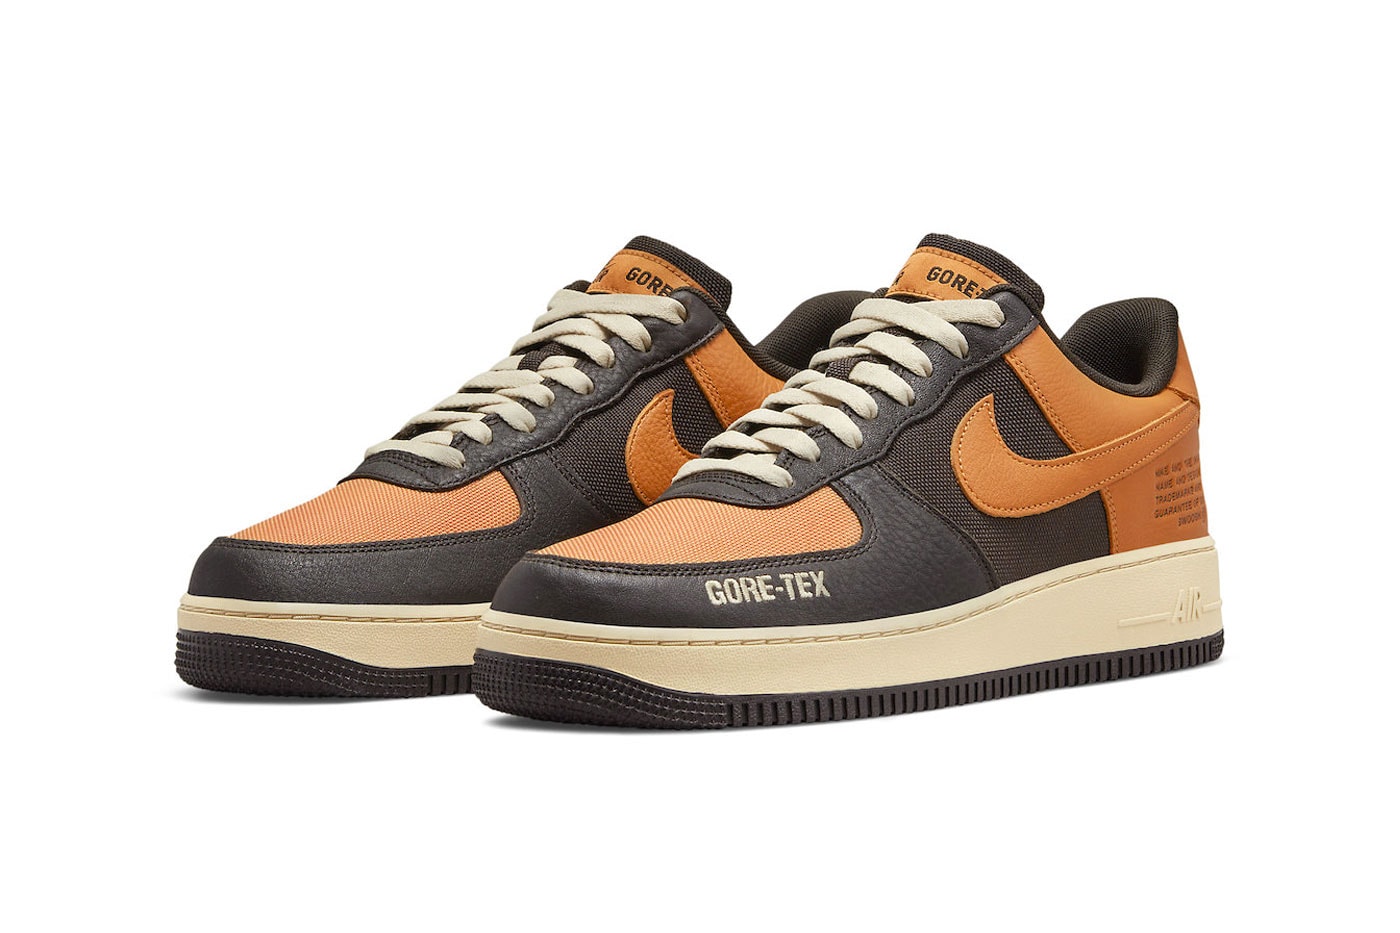 Nike Air Force 1 GORE-TEX Arrives in Olive and Shattered Backboard Colorways black orange brown sail yellowed midsole olive light grey do2760 220 do2760 206 release info